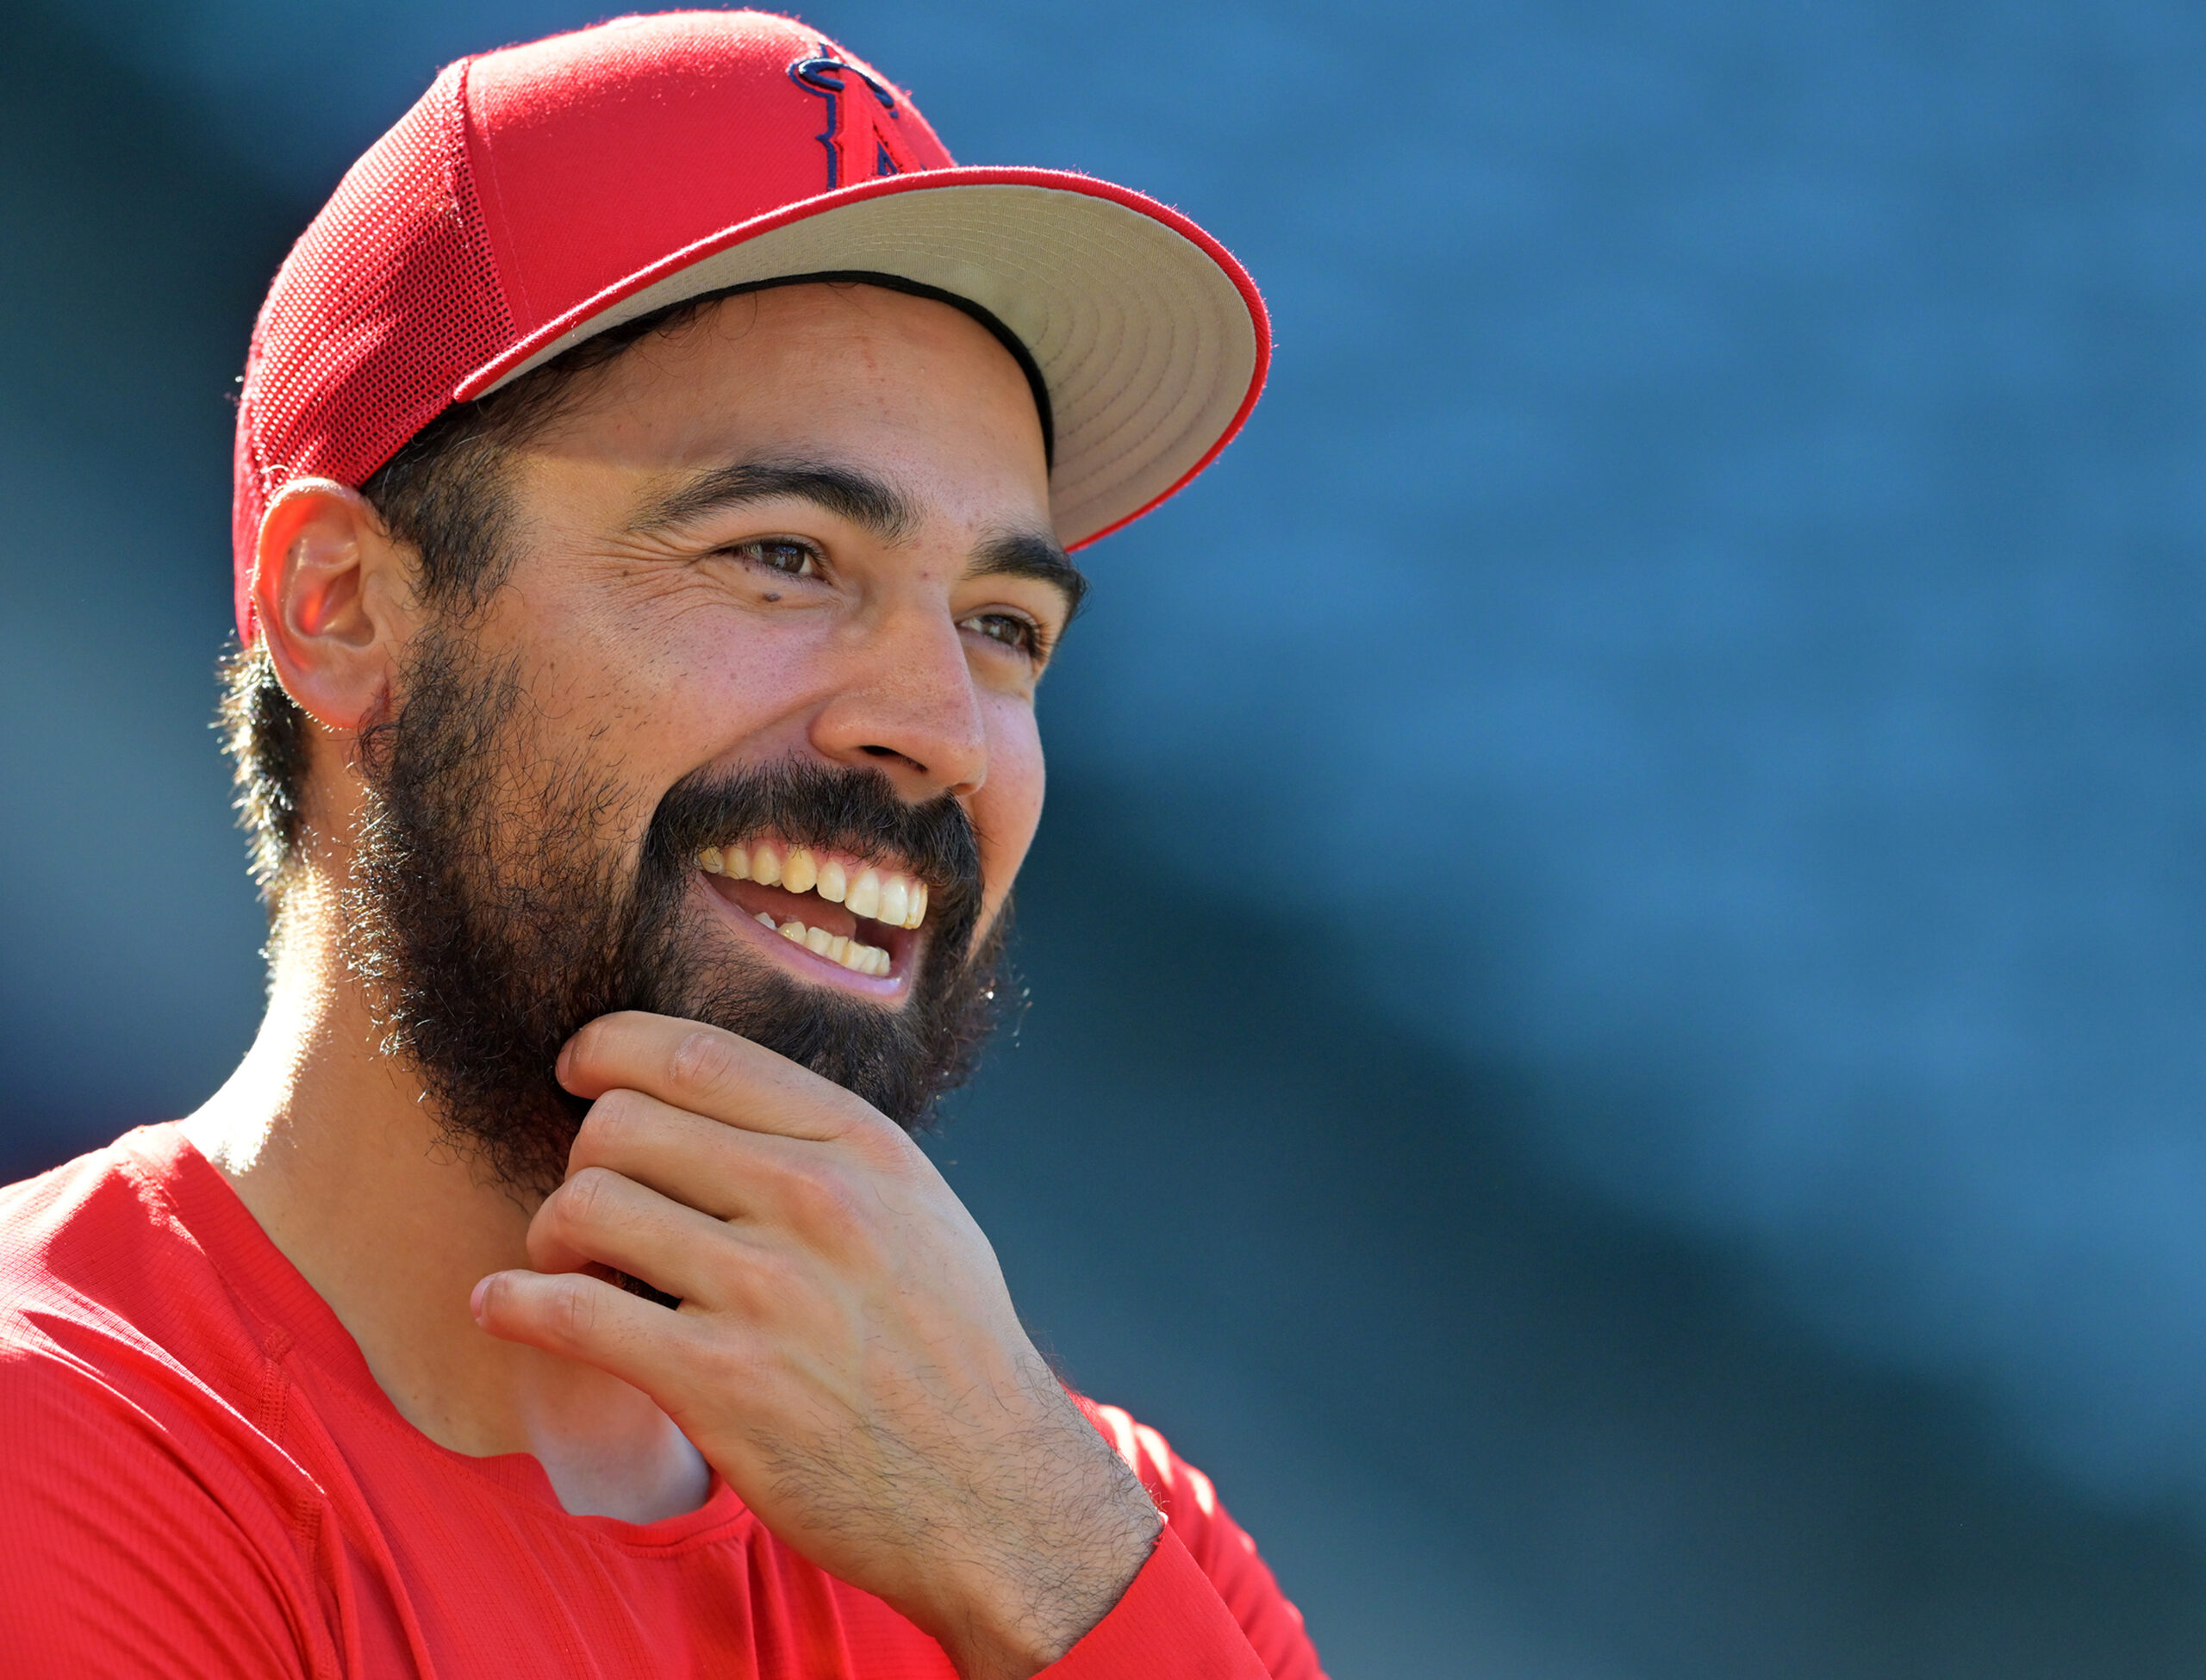 Anthony Rendon punch: Angels star swings, misses at A's fan in